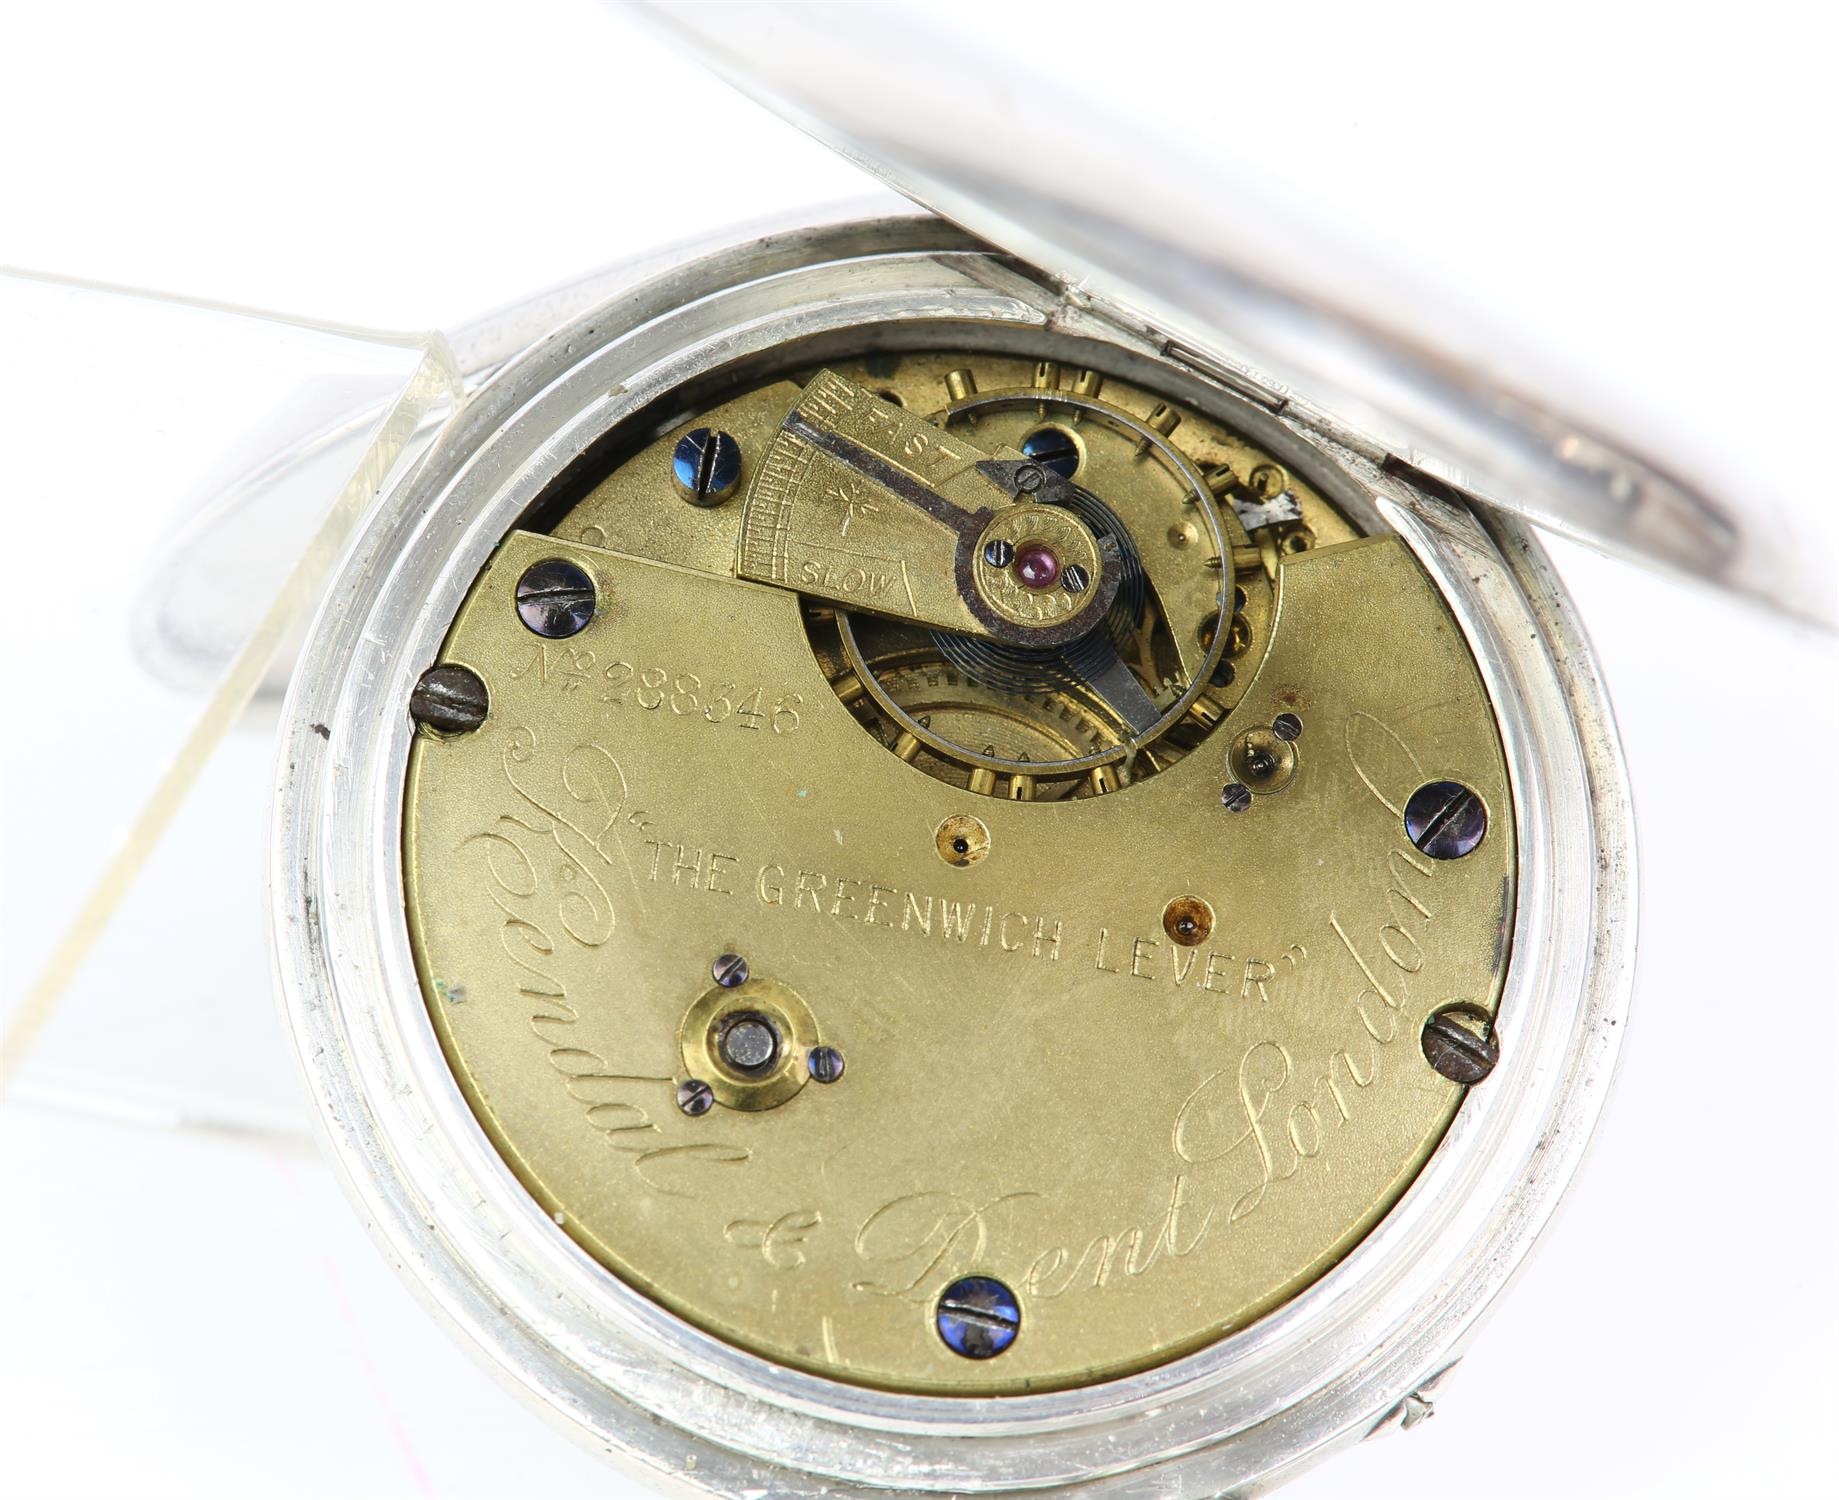 Kendel and Dent, makers to the Admiralty, silver and enamel gents half hunter pocket watch, - Image 3 of 3